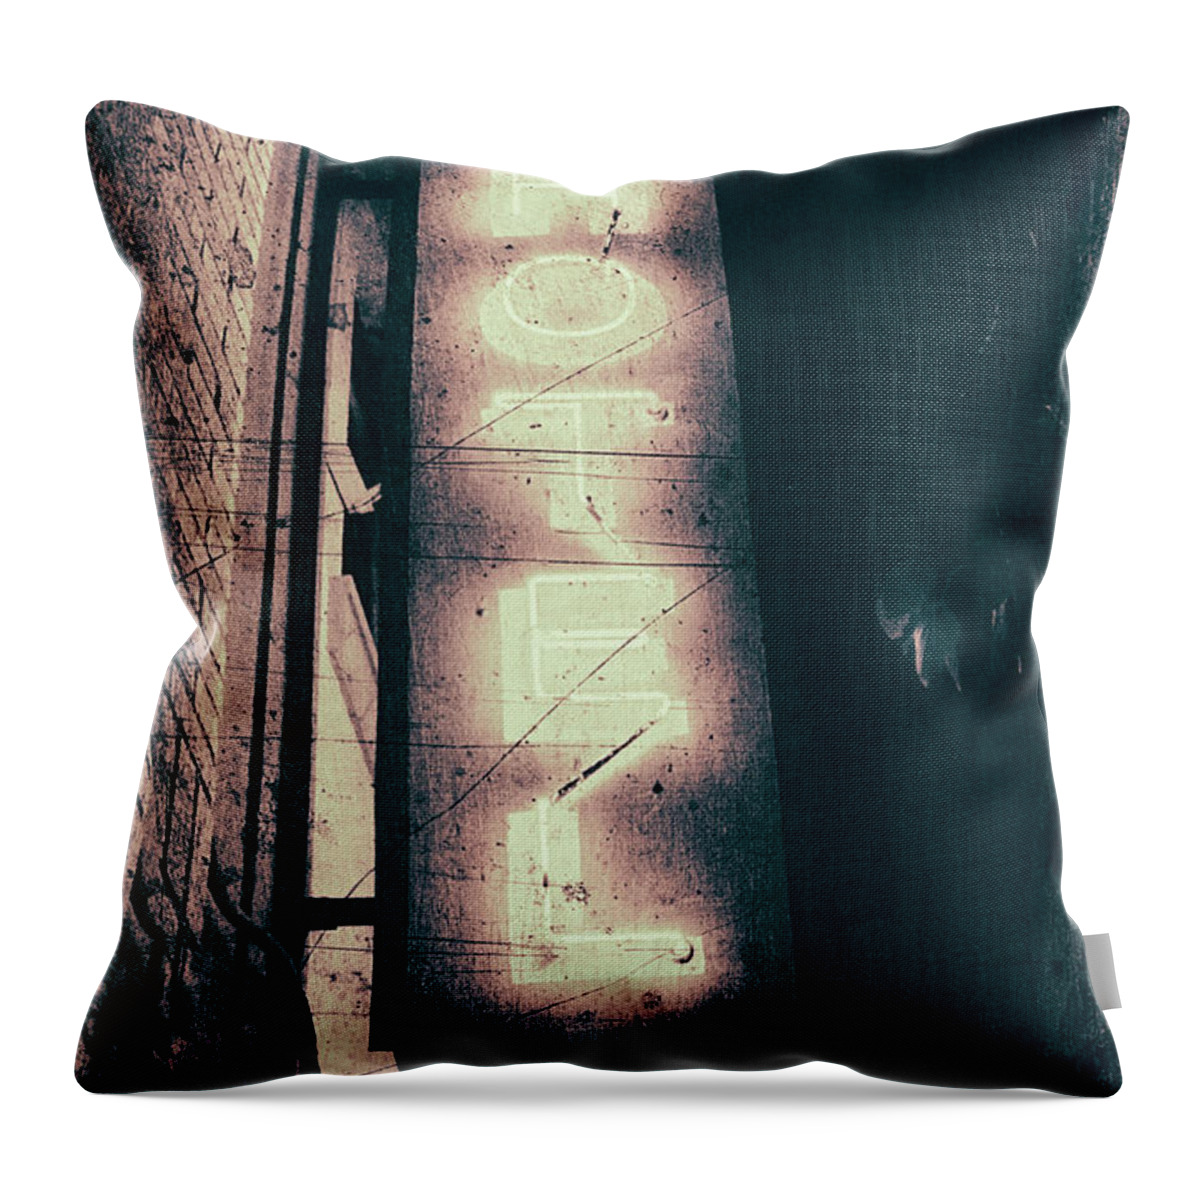 Gold Throw Pillow featuring the photograph Neon Coffin by Denise Dube